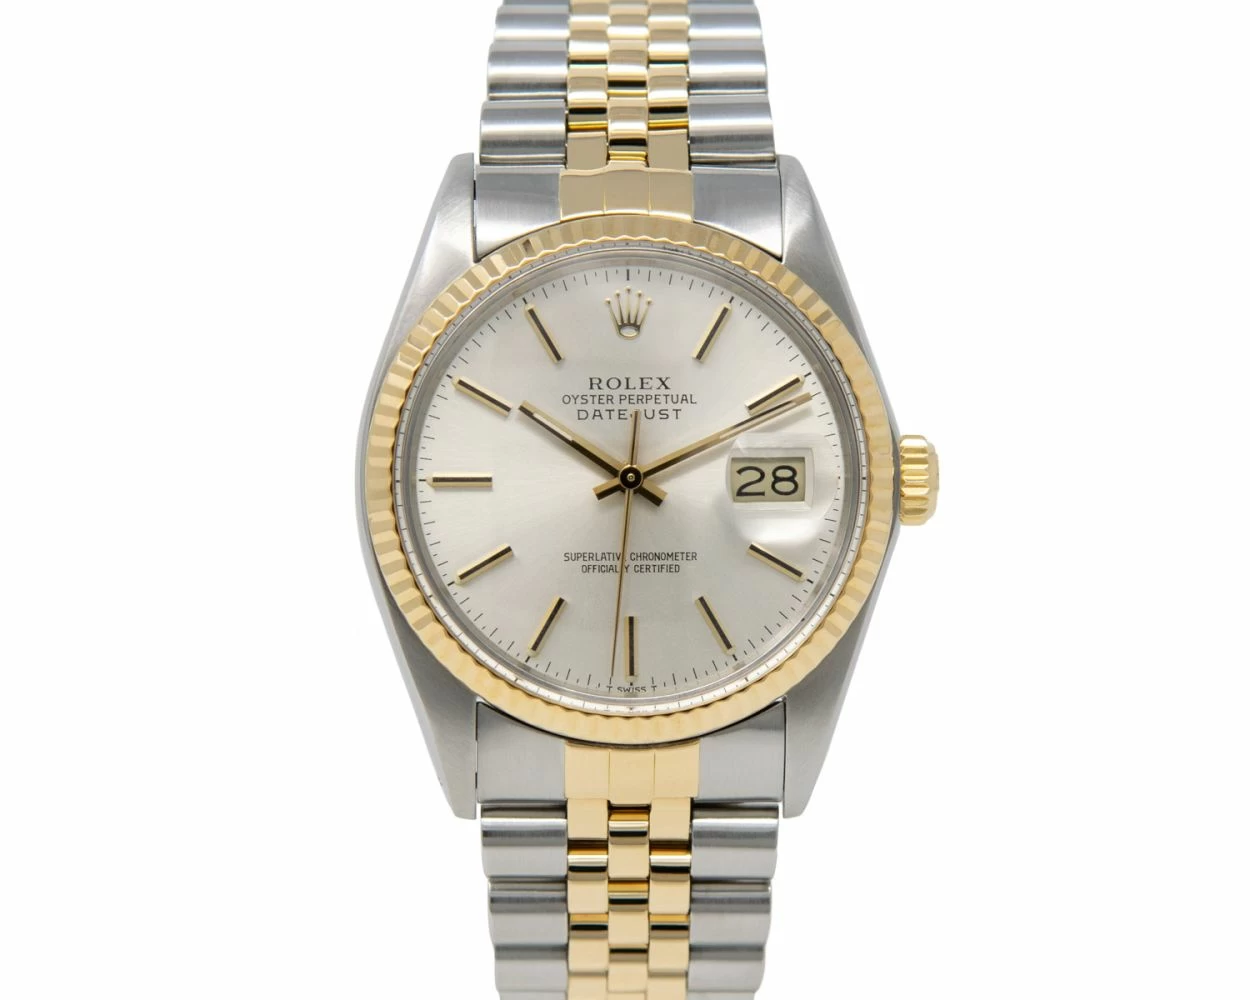 Genuine Rolex Datejust 36mm 16013 Automatic Watch, Steel & Yellow Gold, Silver Dial, 2-Year Warranty, Pre-owned